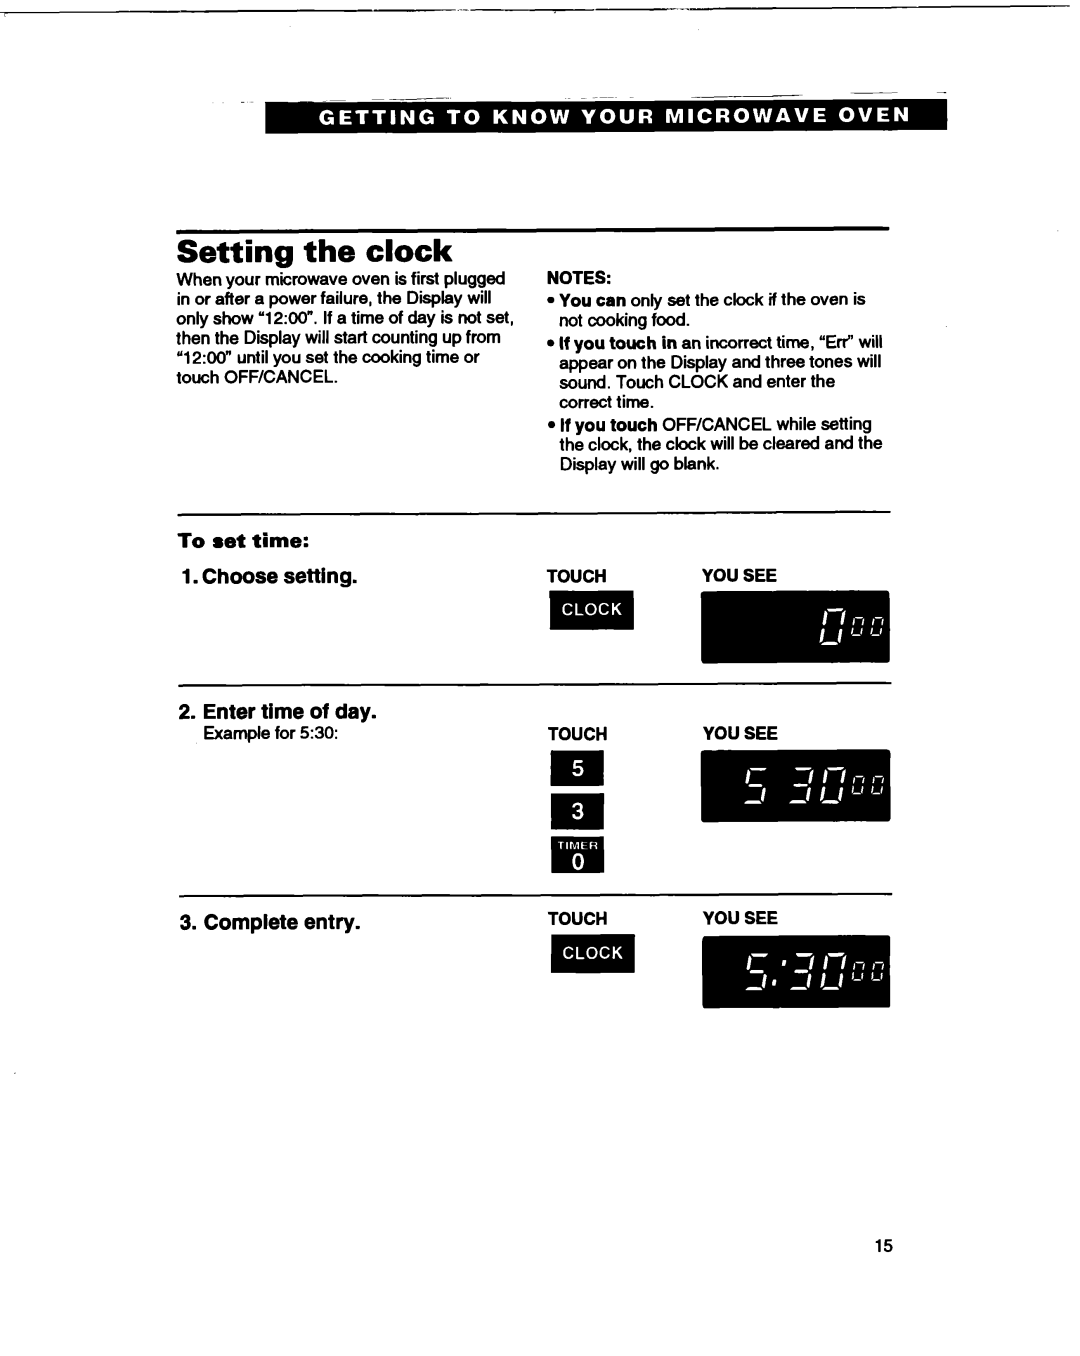 Whirlpool MT1061XB Setting the clock, Choose setting, Enter time of day, Complete entry, To set time, Touch 